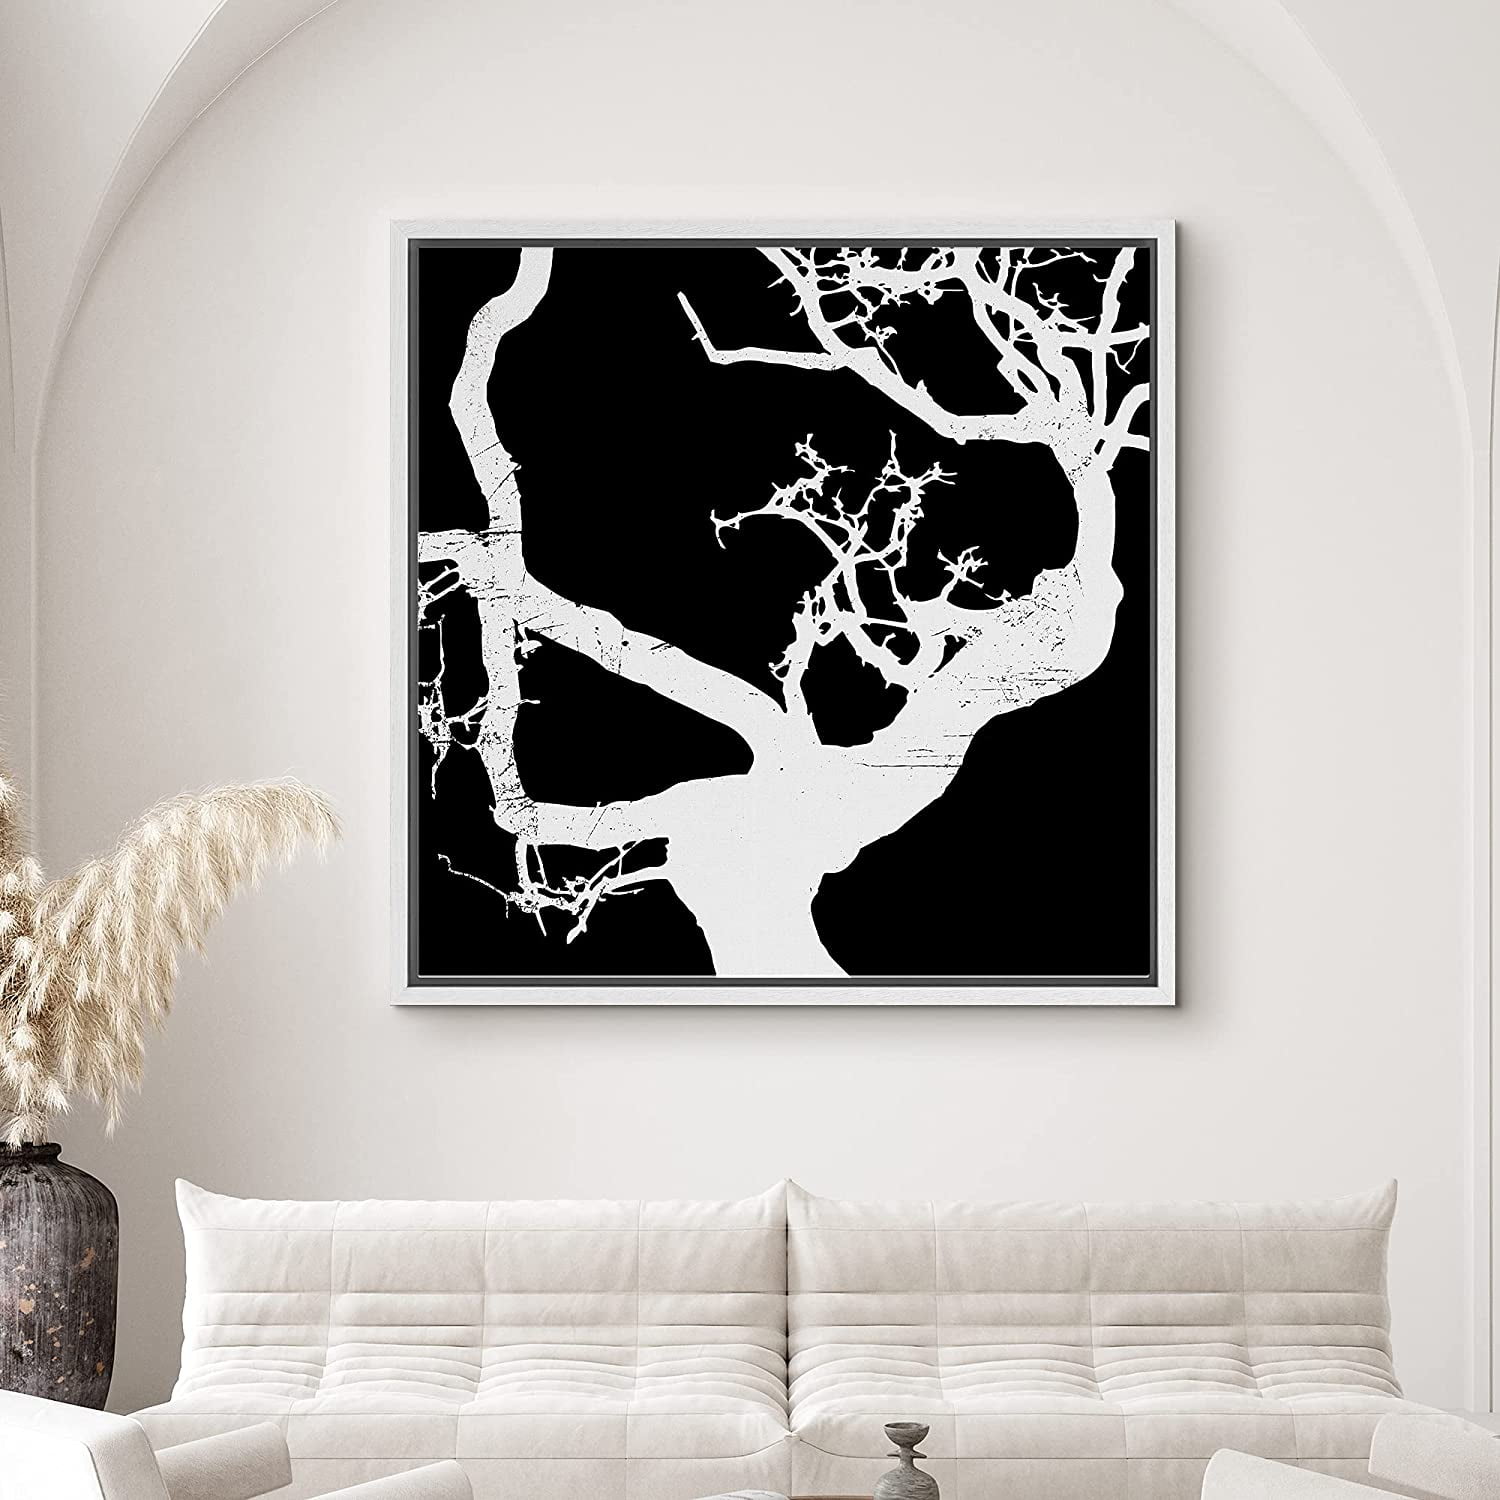 PixonSign Framed Canvas Print Wall Art Gray Tree Branches on Black